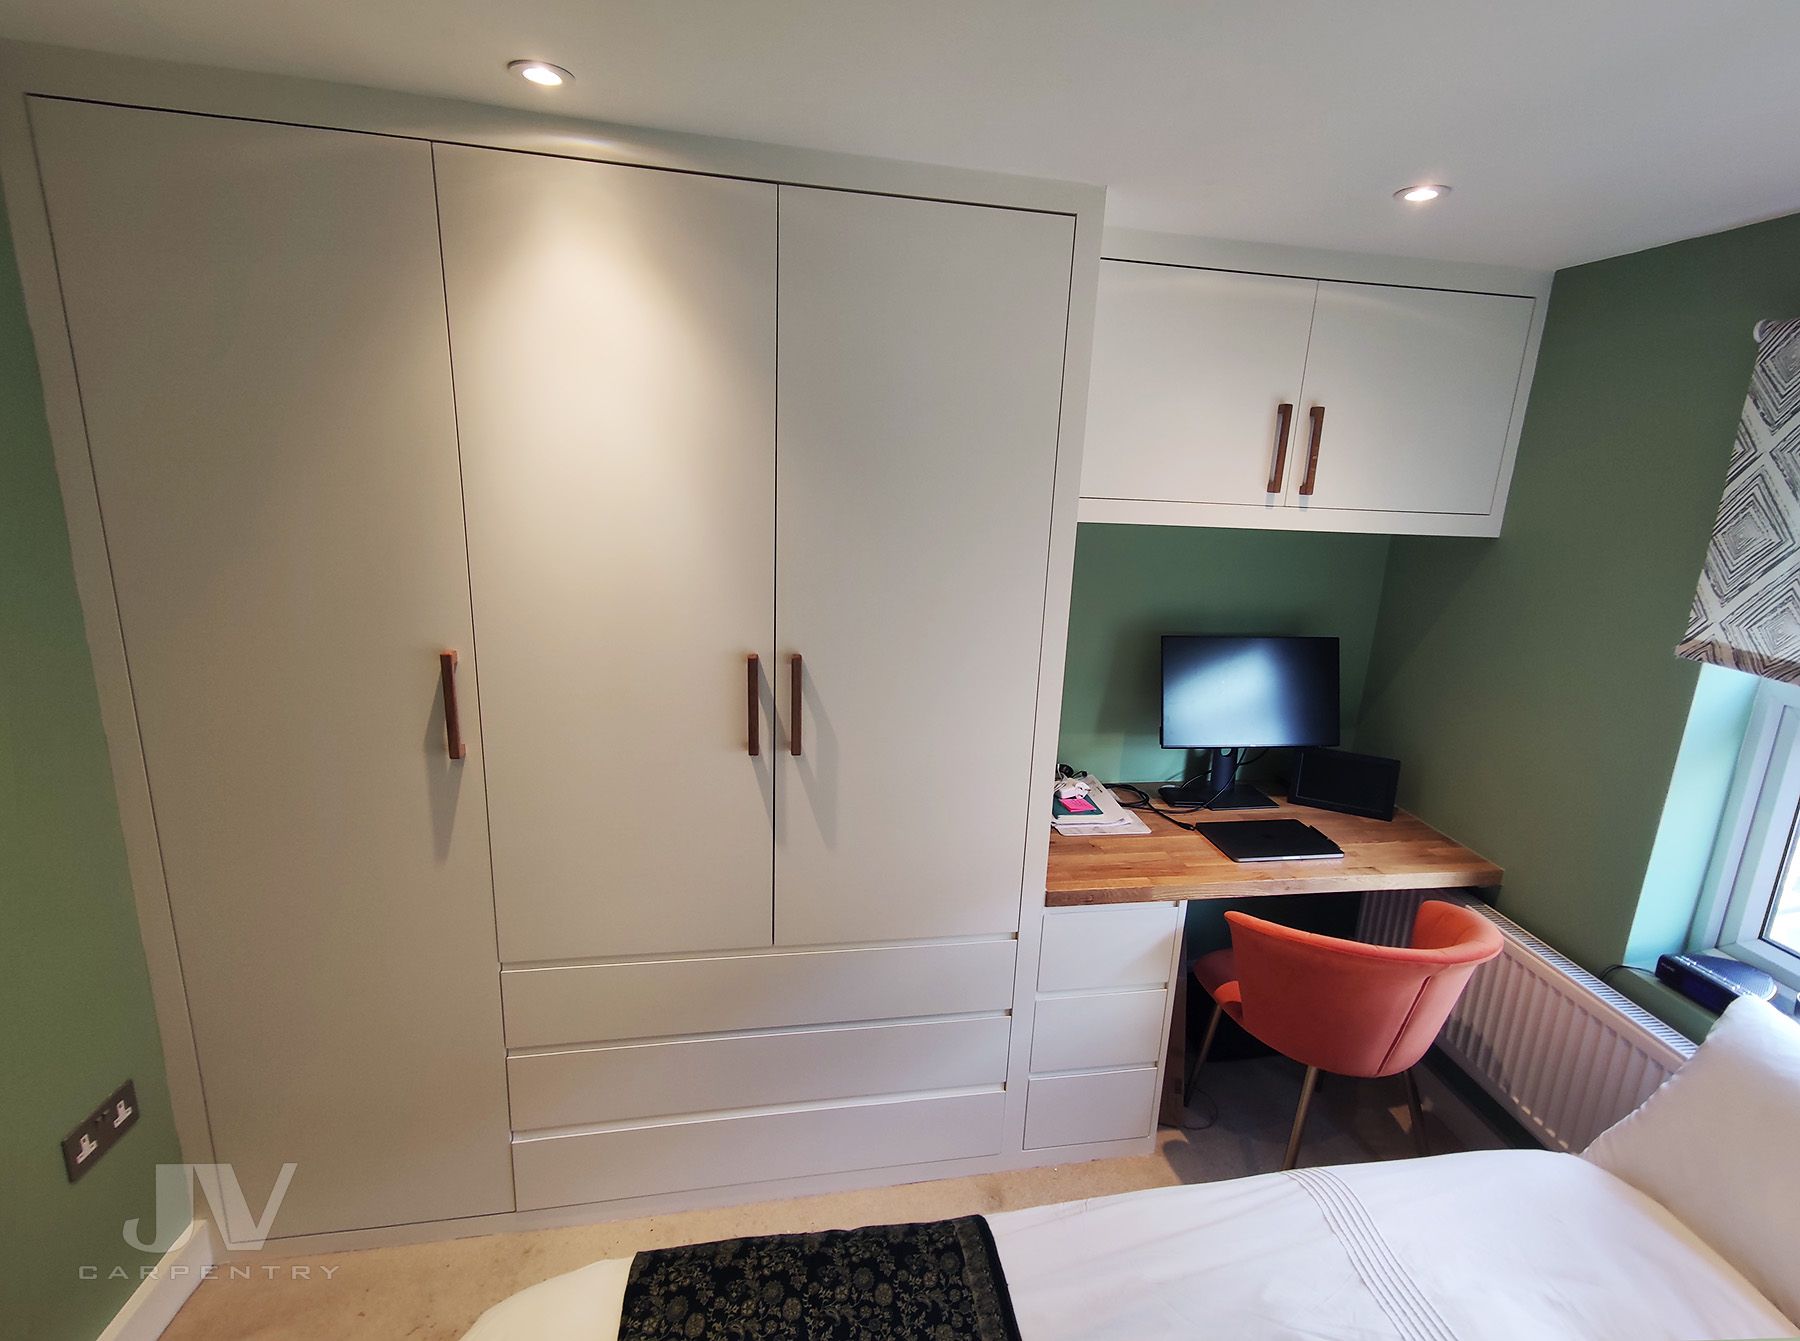 9 Fitted Wardrobes With Dressing Table Ideas | Jv Carpentry With Wardrobes And Dressing Tables (View 20 of 22)